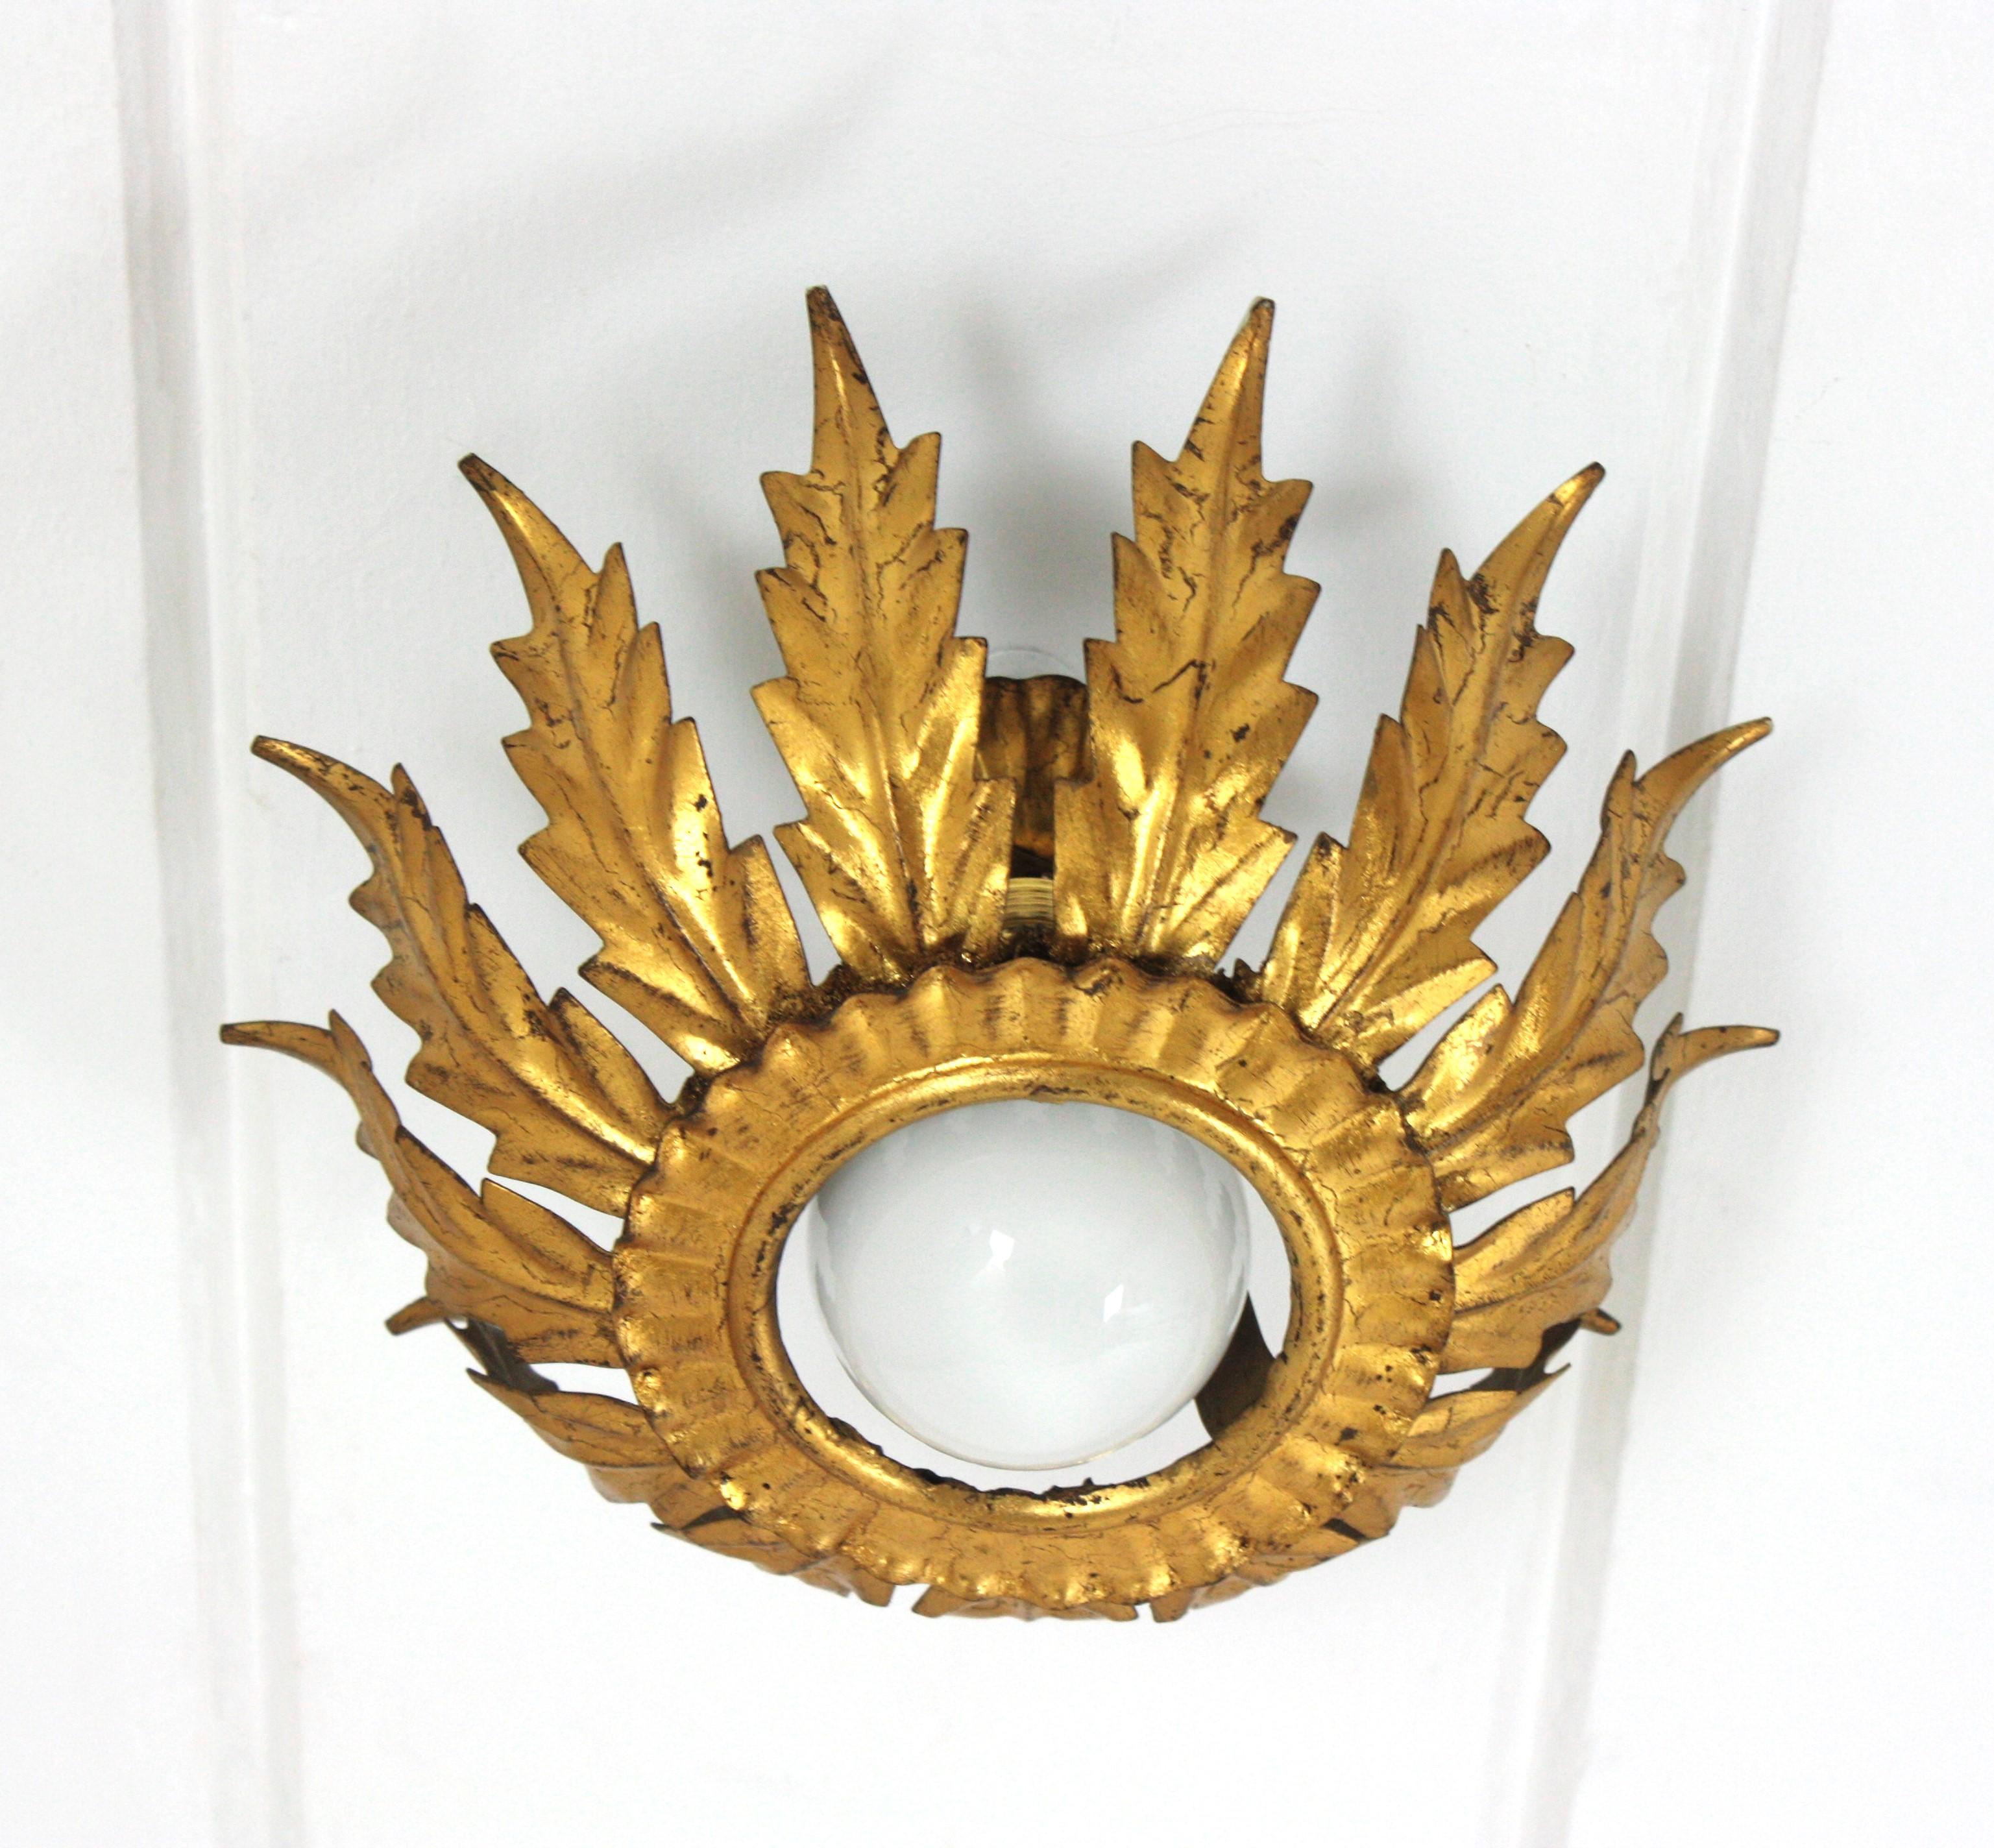 Eye-catching sunburst foliage flower flush mount light fixture in gold leaf gilt iron. France, 1940s.
This handwrought iron ceiling light fixture has a nice patina showing its original gold leaf gilding.
It can be used as a flush mount, as a wall